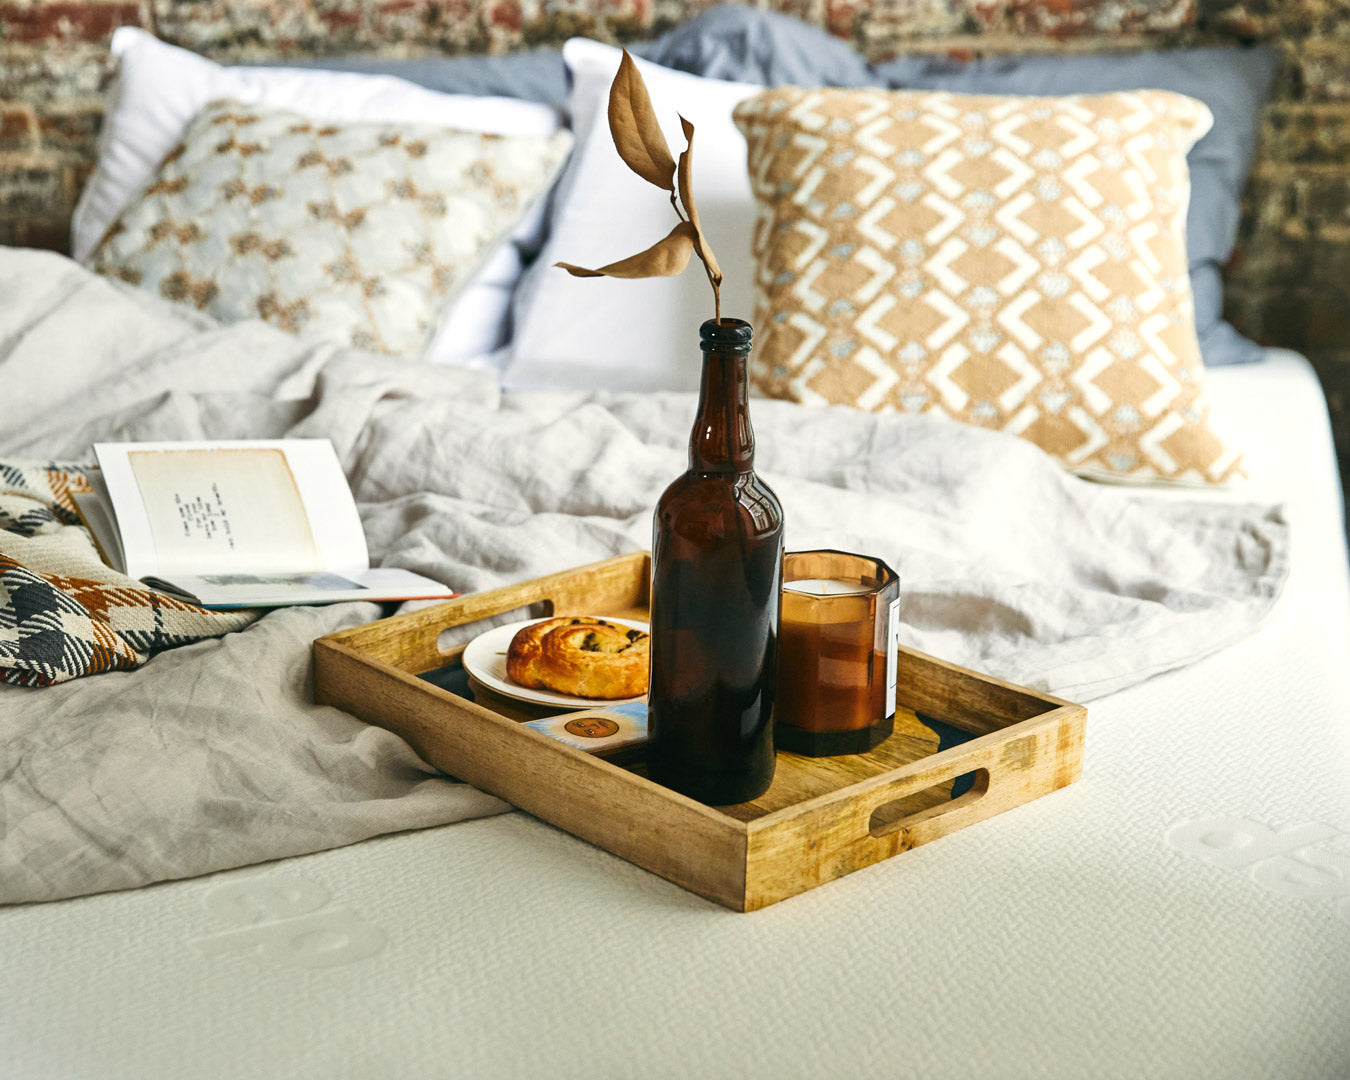 A meal tray and a book are placed on the Polysleep mattress